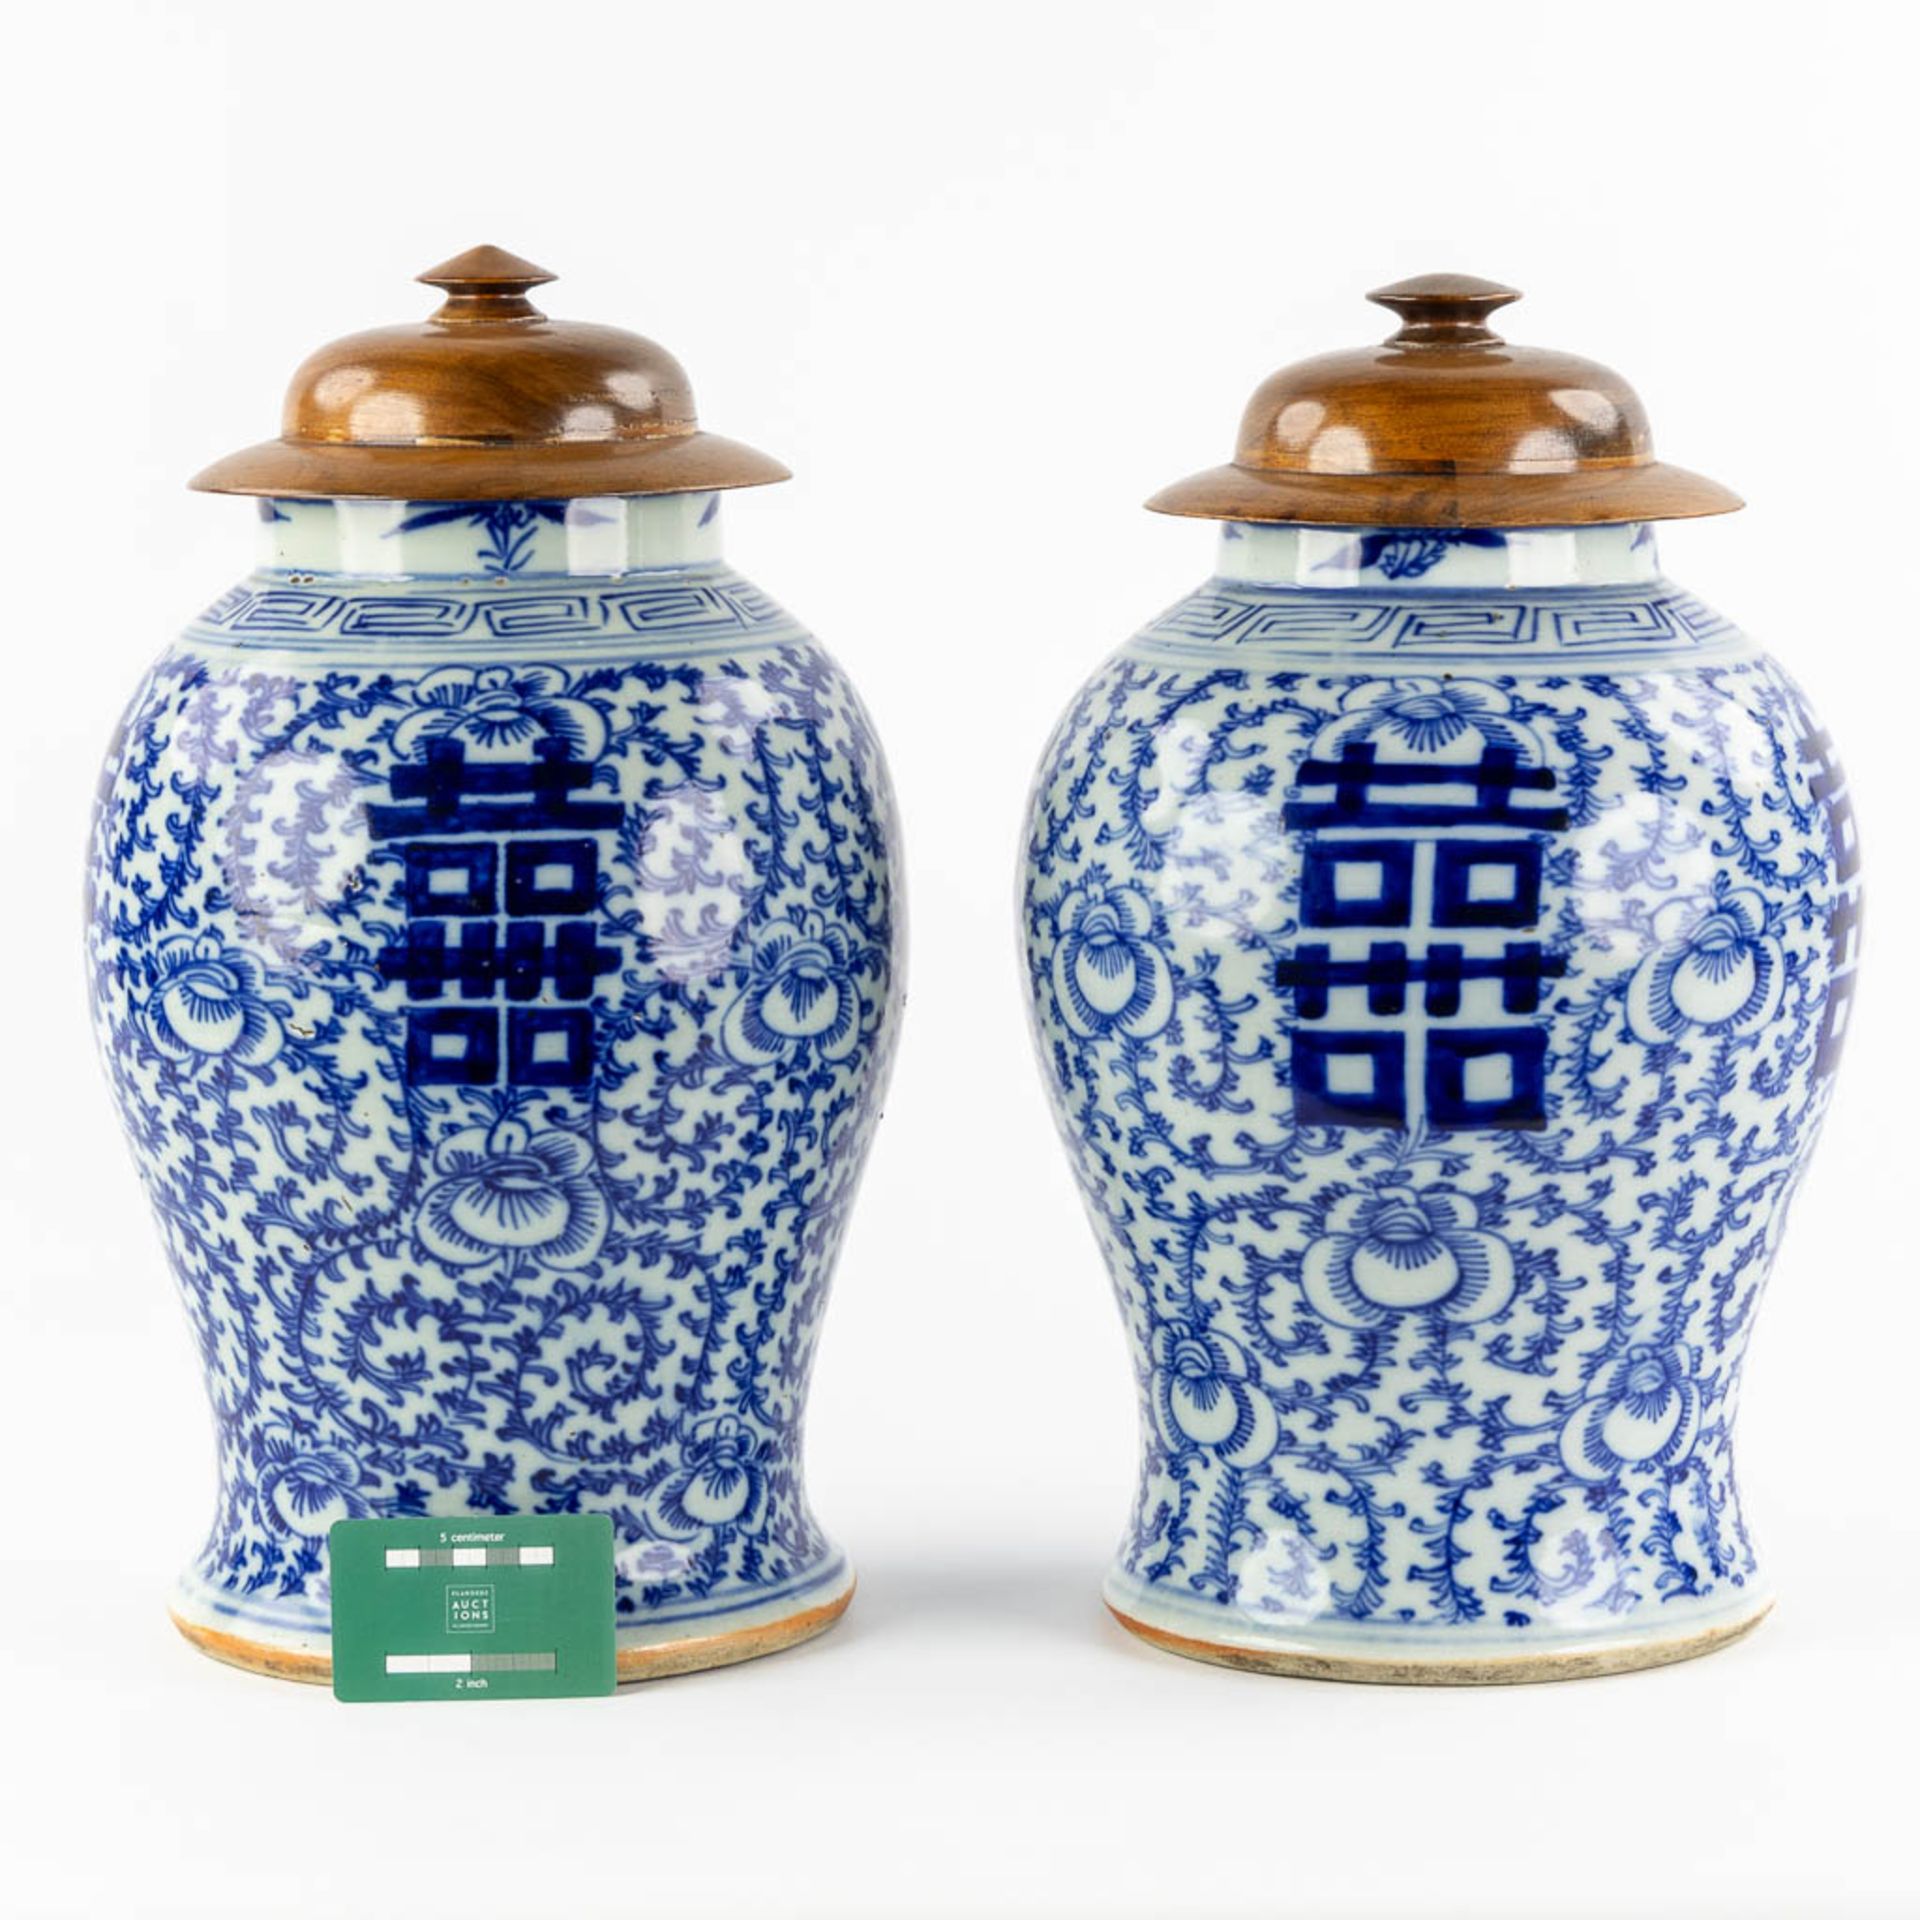 A pair of Chinese vases with a blue-white decor and a Double Xi-sign. 19th/20th C. (H:41 x D:26 cm) - Image 2 of 8